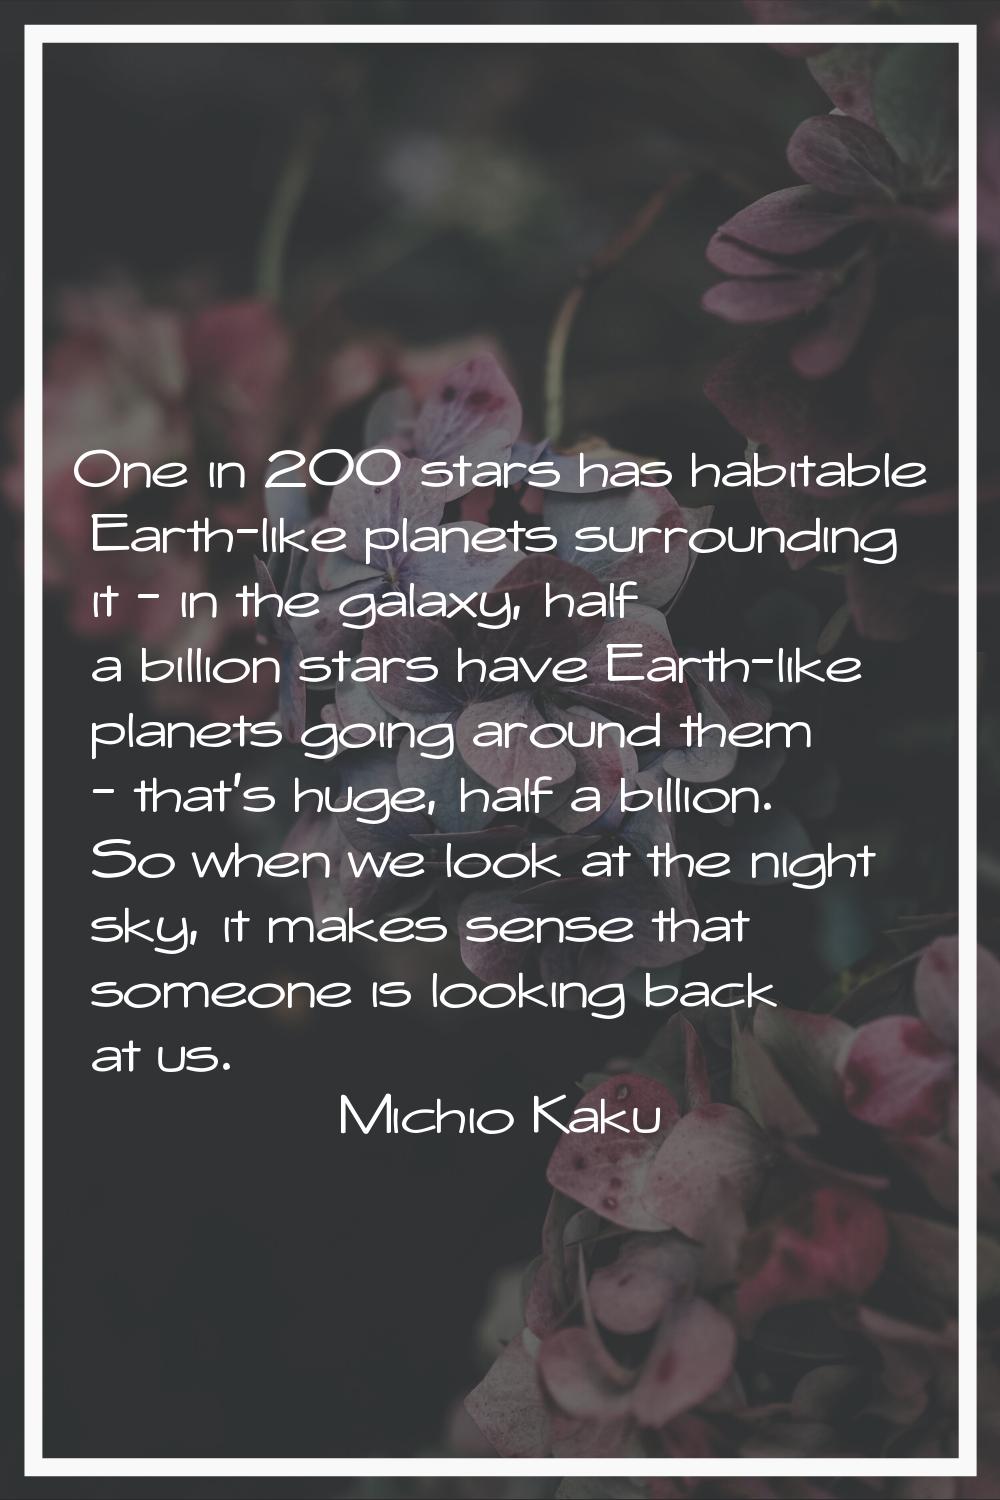 One in 200 stars has habitable Earth-like planets surrounding it - in the galaxy, half a billion st